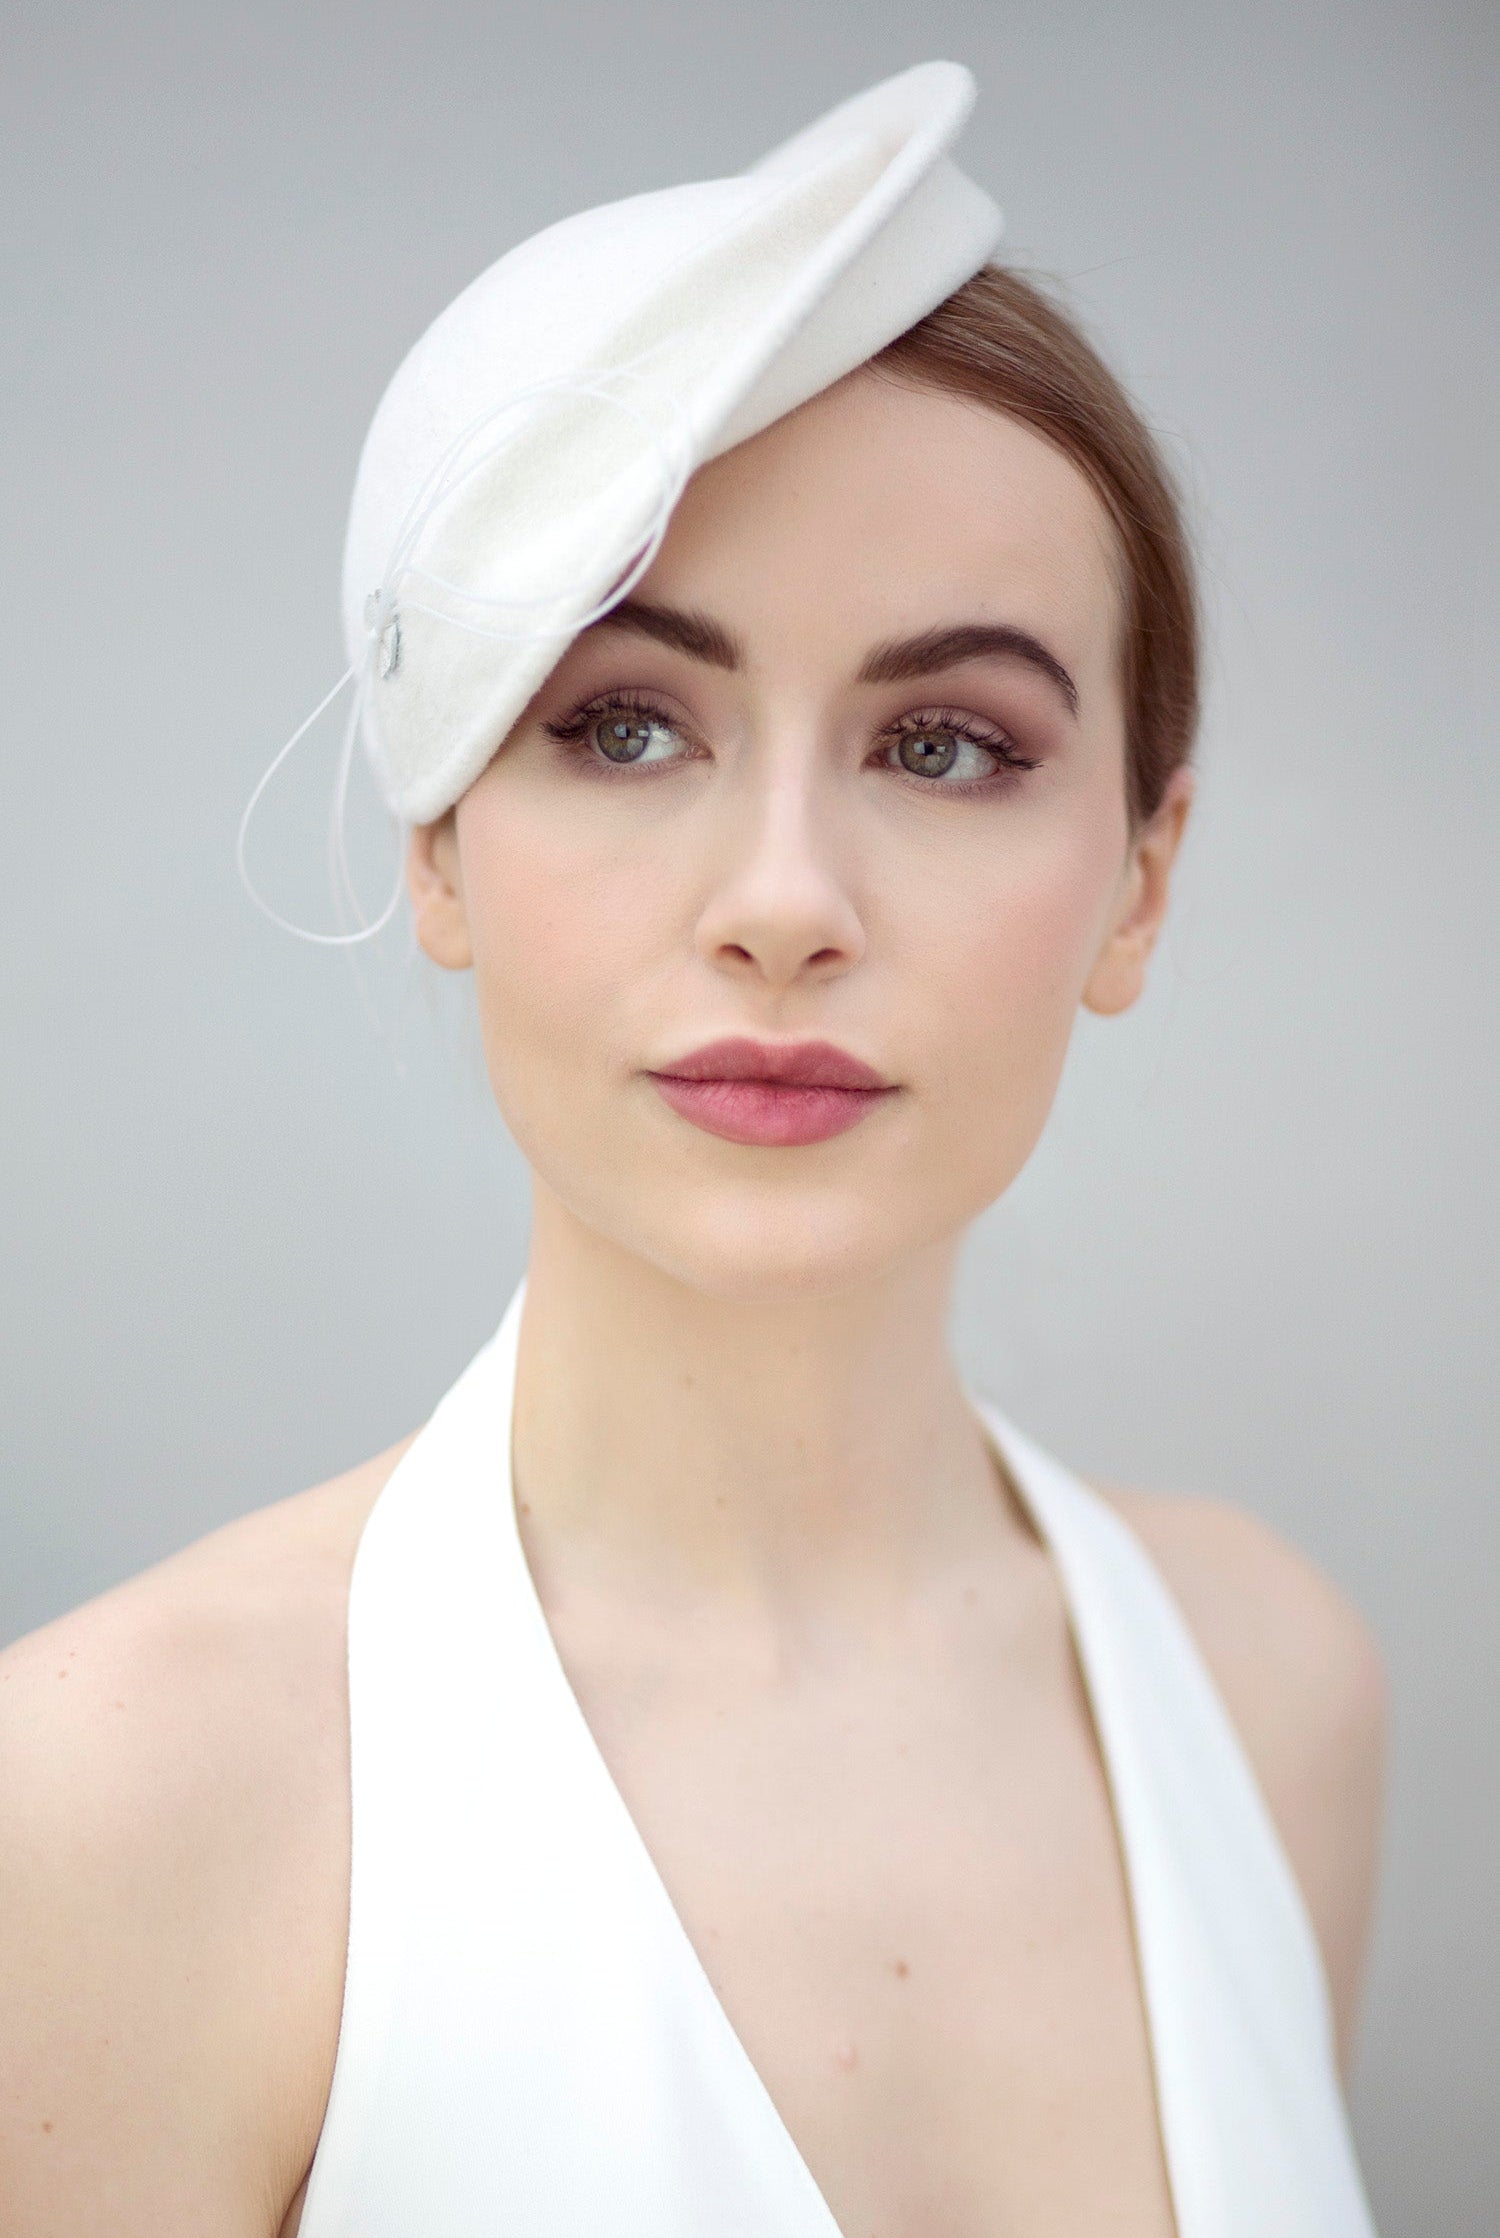 Sample Sale - BRS02 - Maggie Mowbray Millinery